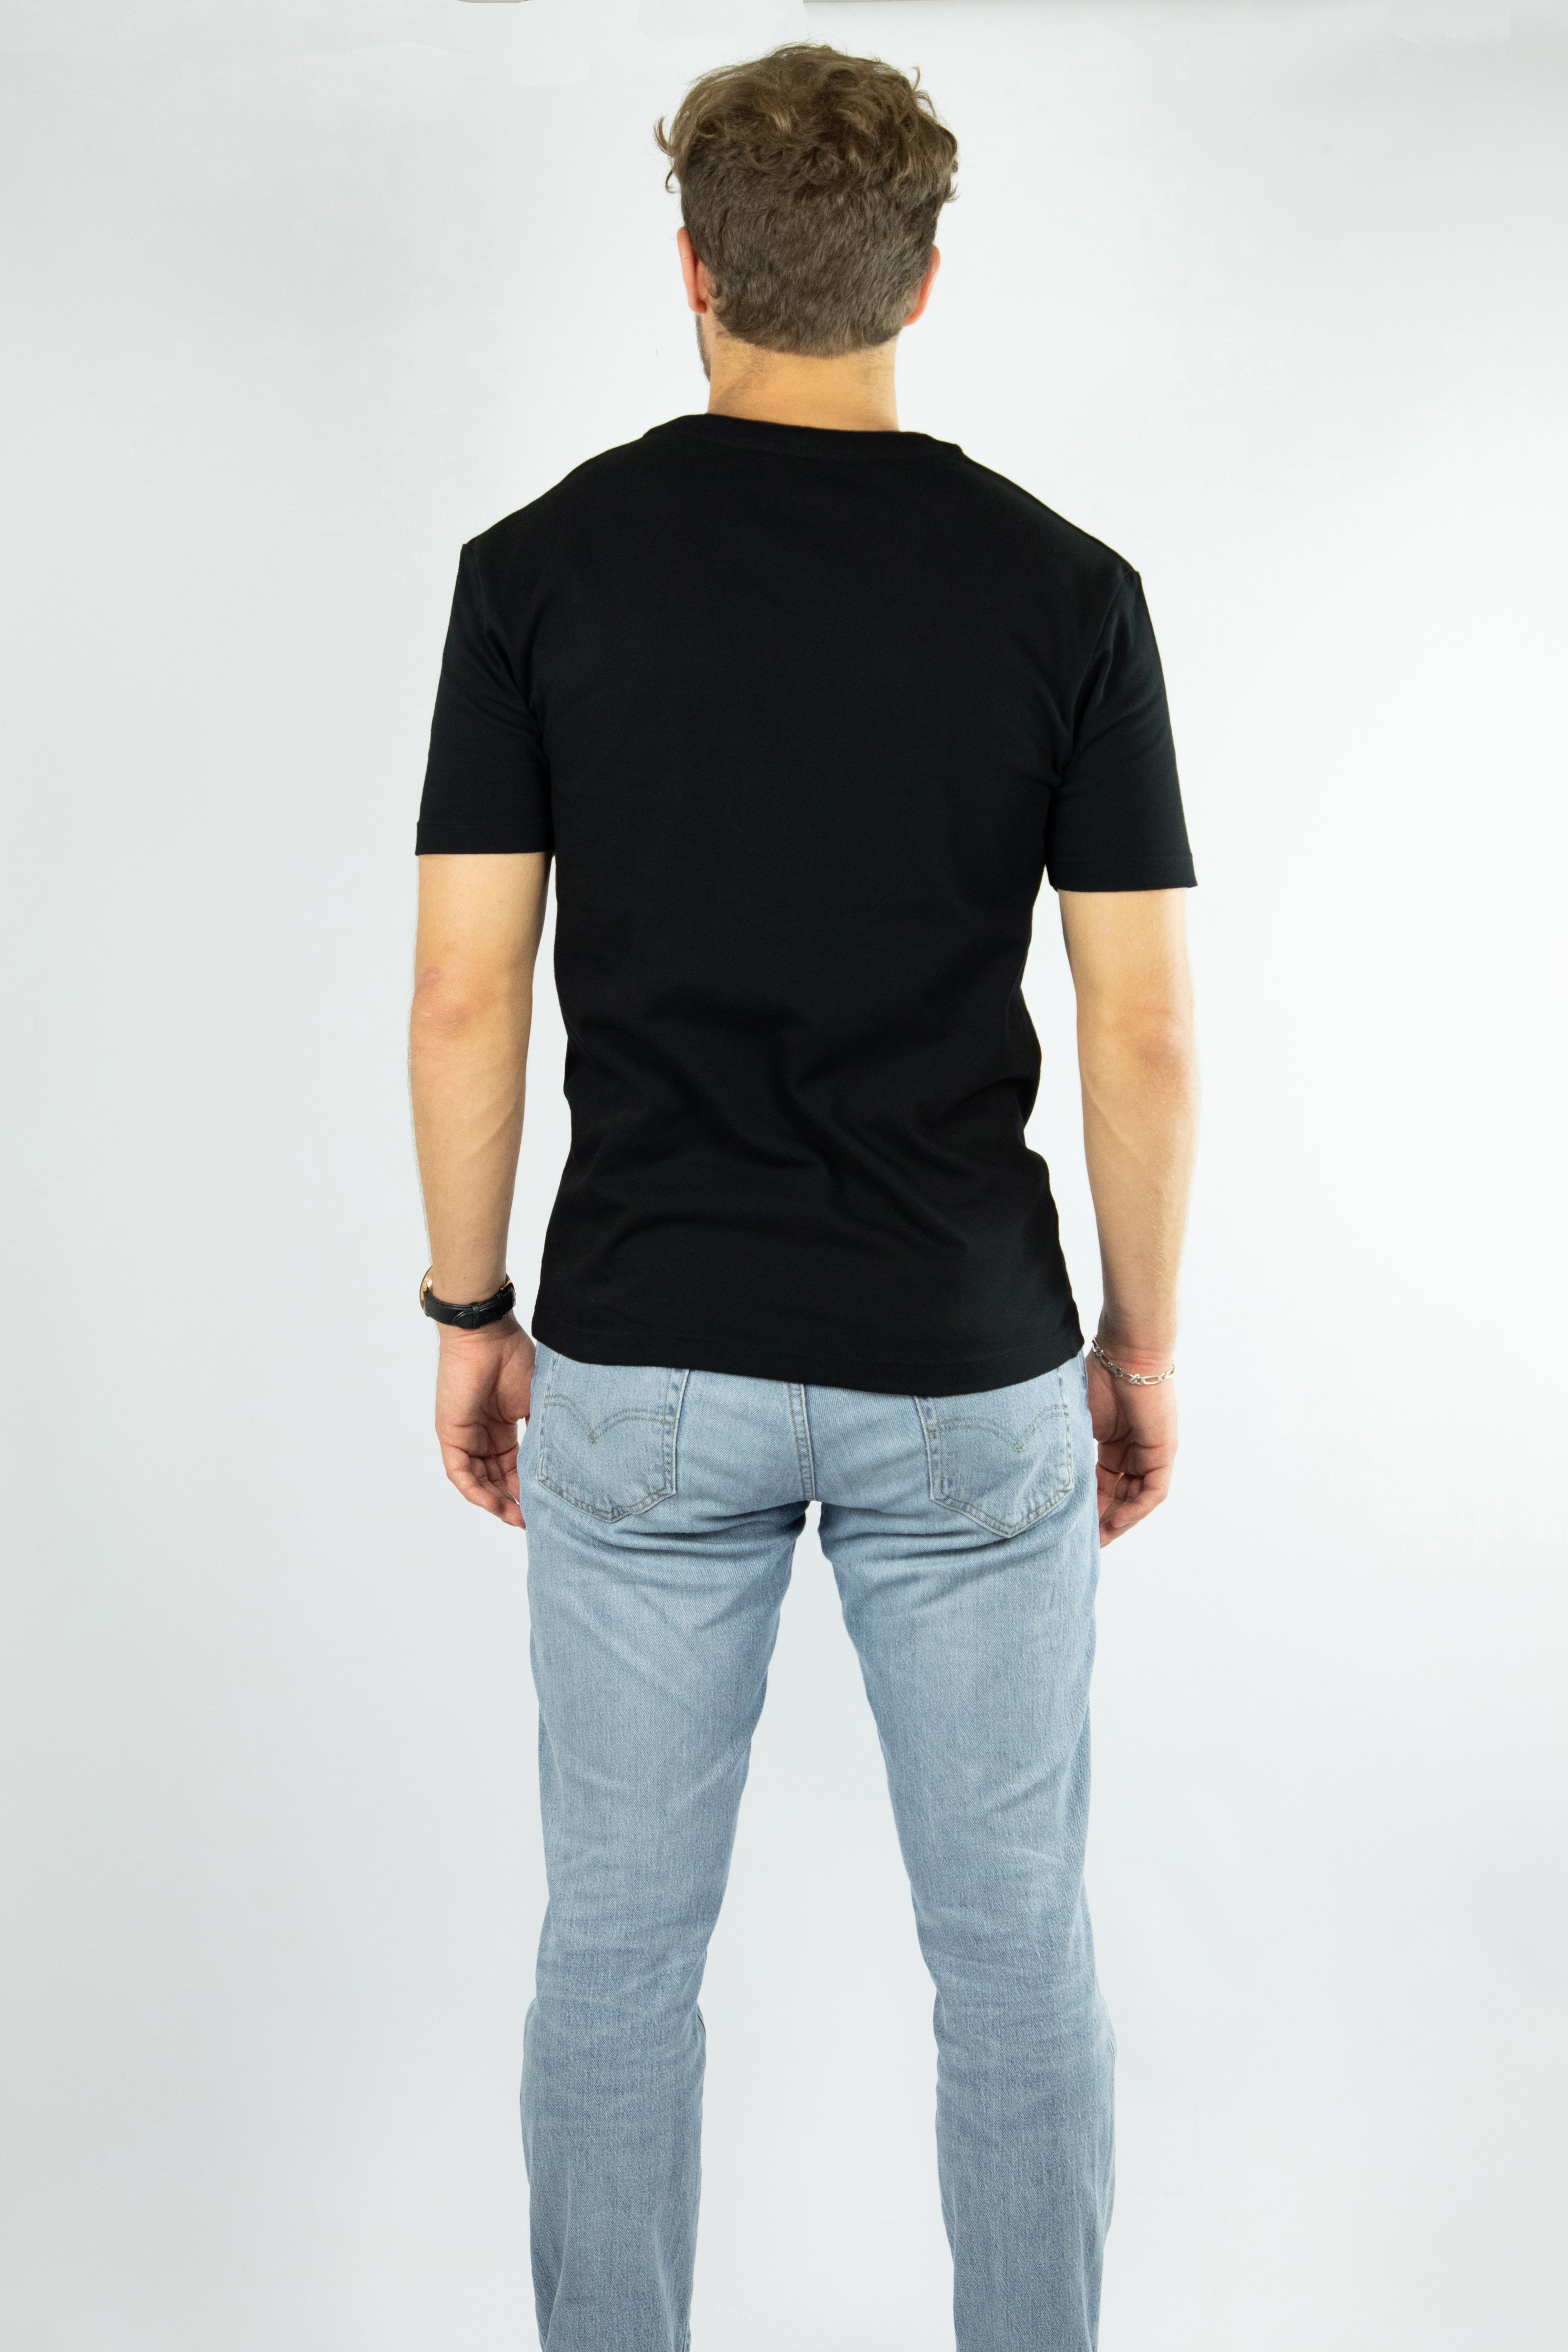 Men's black cotton t-shirt Made In France - embroidered giraffe